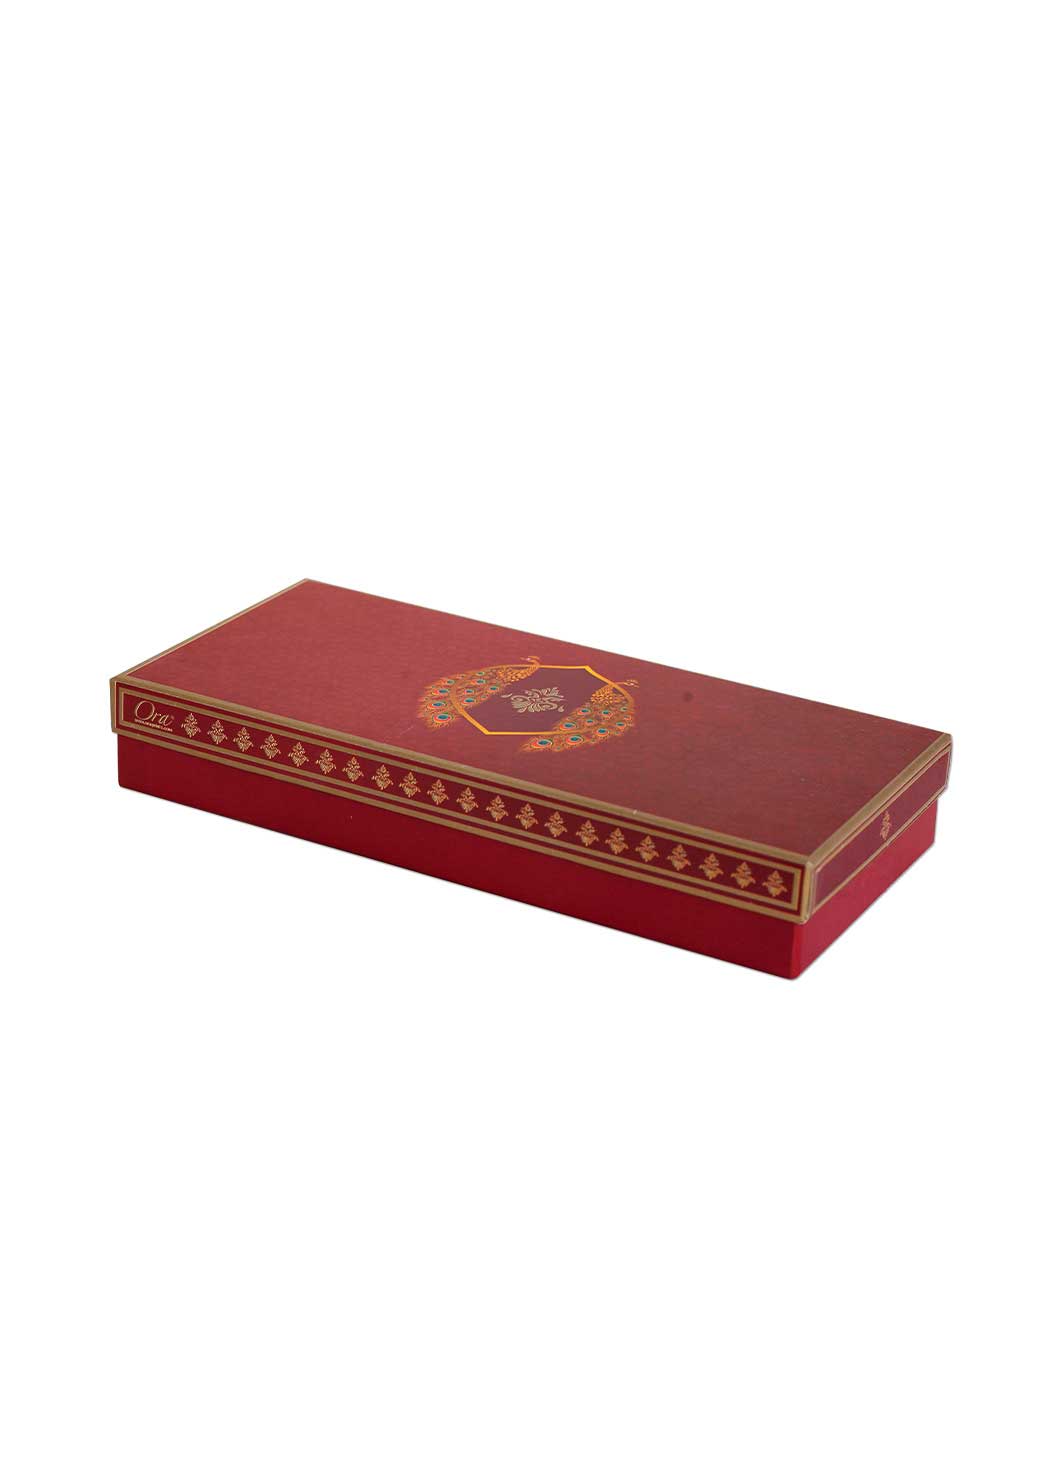 1KG Beautiful Peacock Red & Gold Design Box for Packing